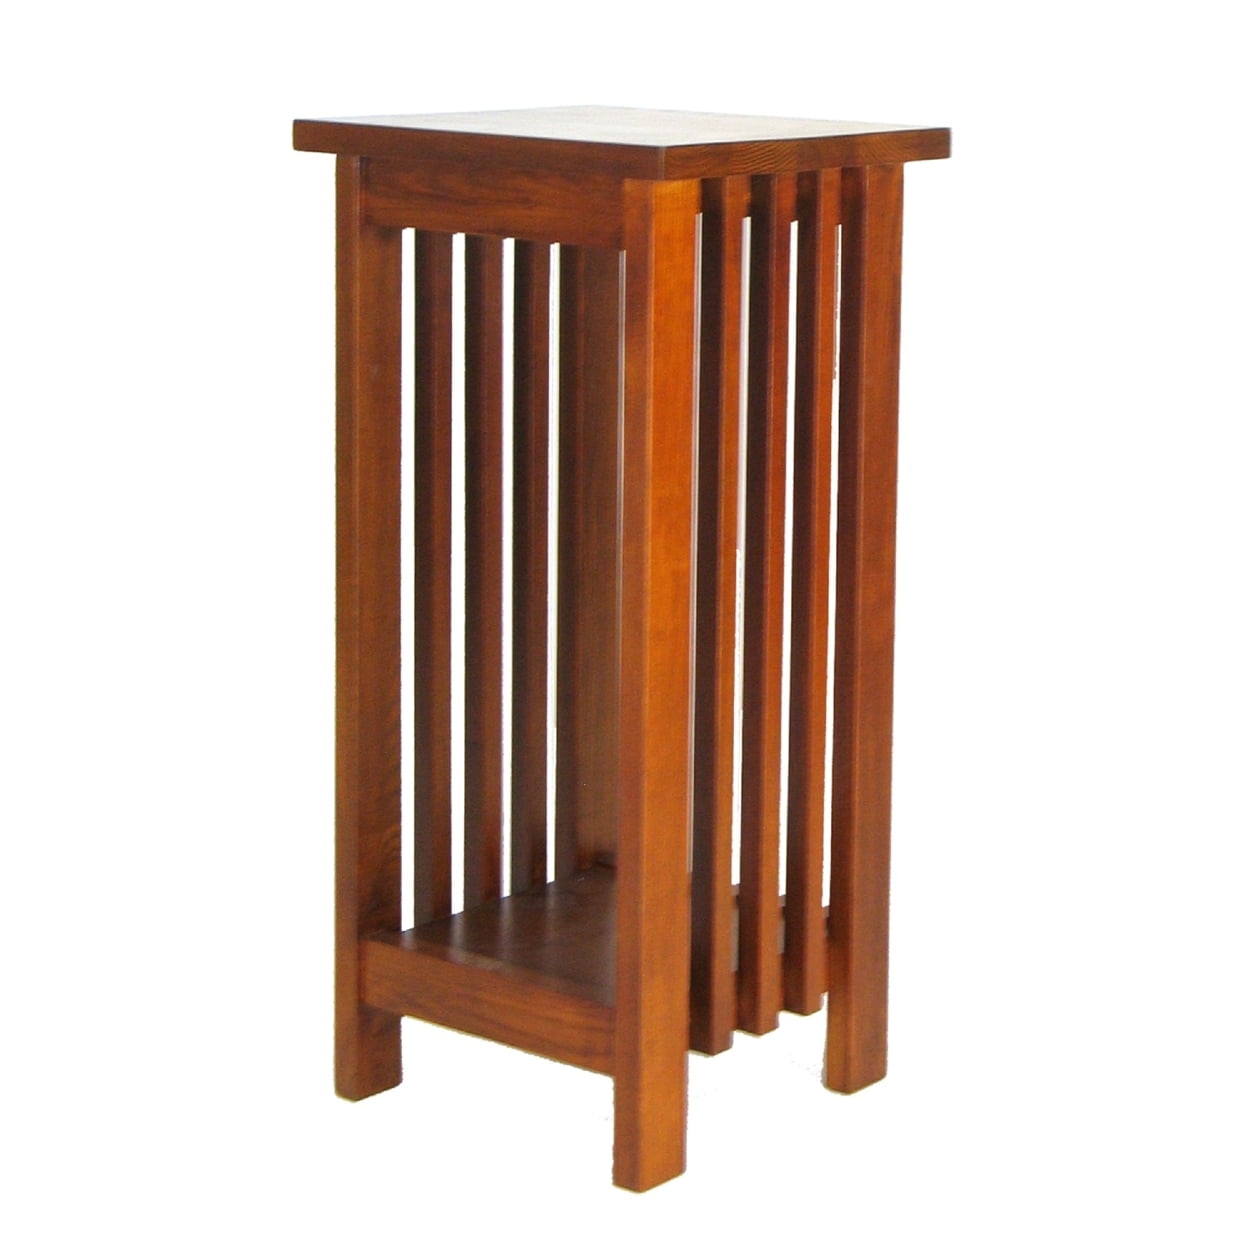 Bm210436 25 In. Wooden Flower Stand With Slatted Sides & Bottom Shelf, Brown